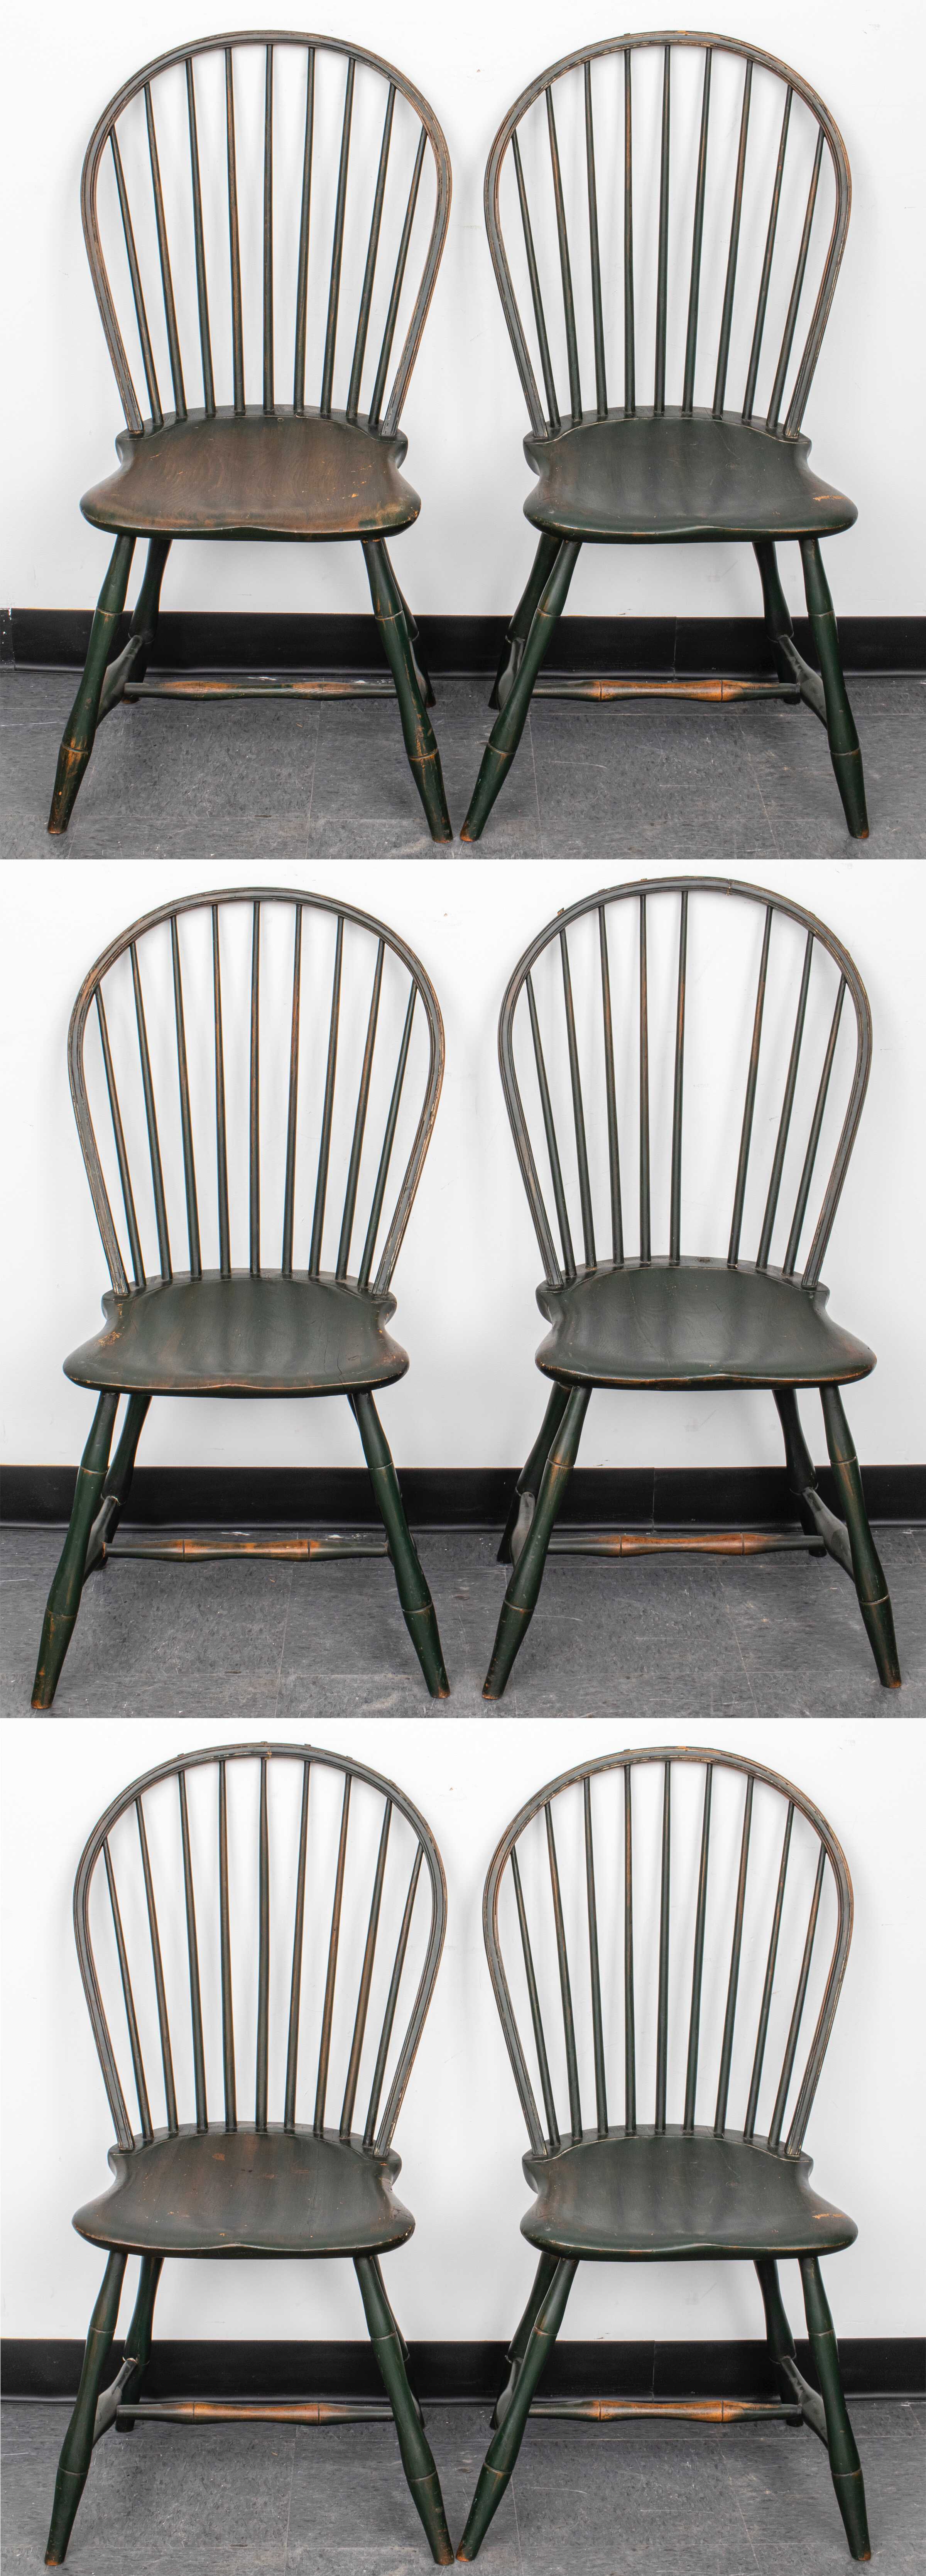 GREEN PAINTED WINDSOR CHAIRS 6 3c41a5